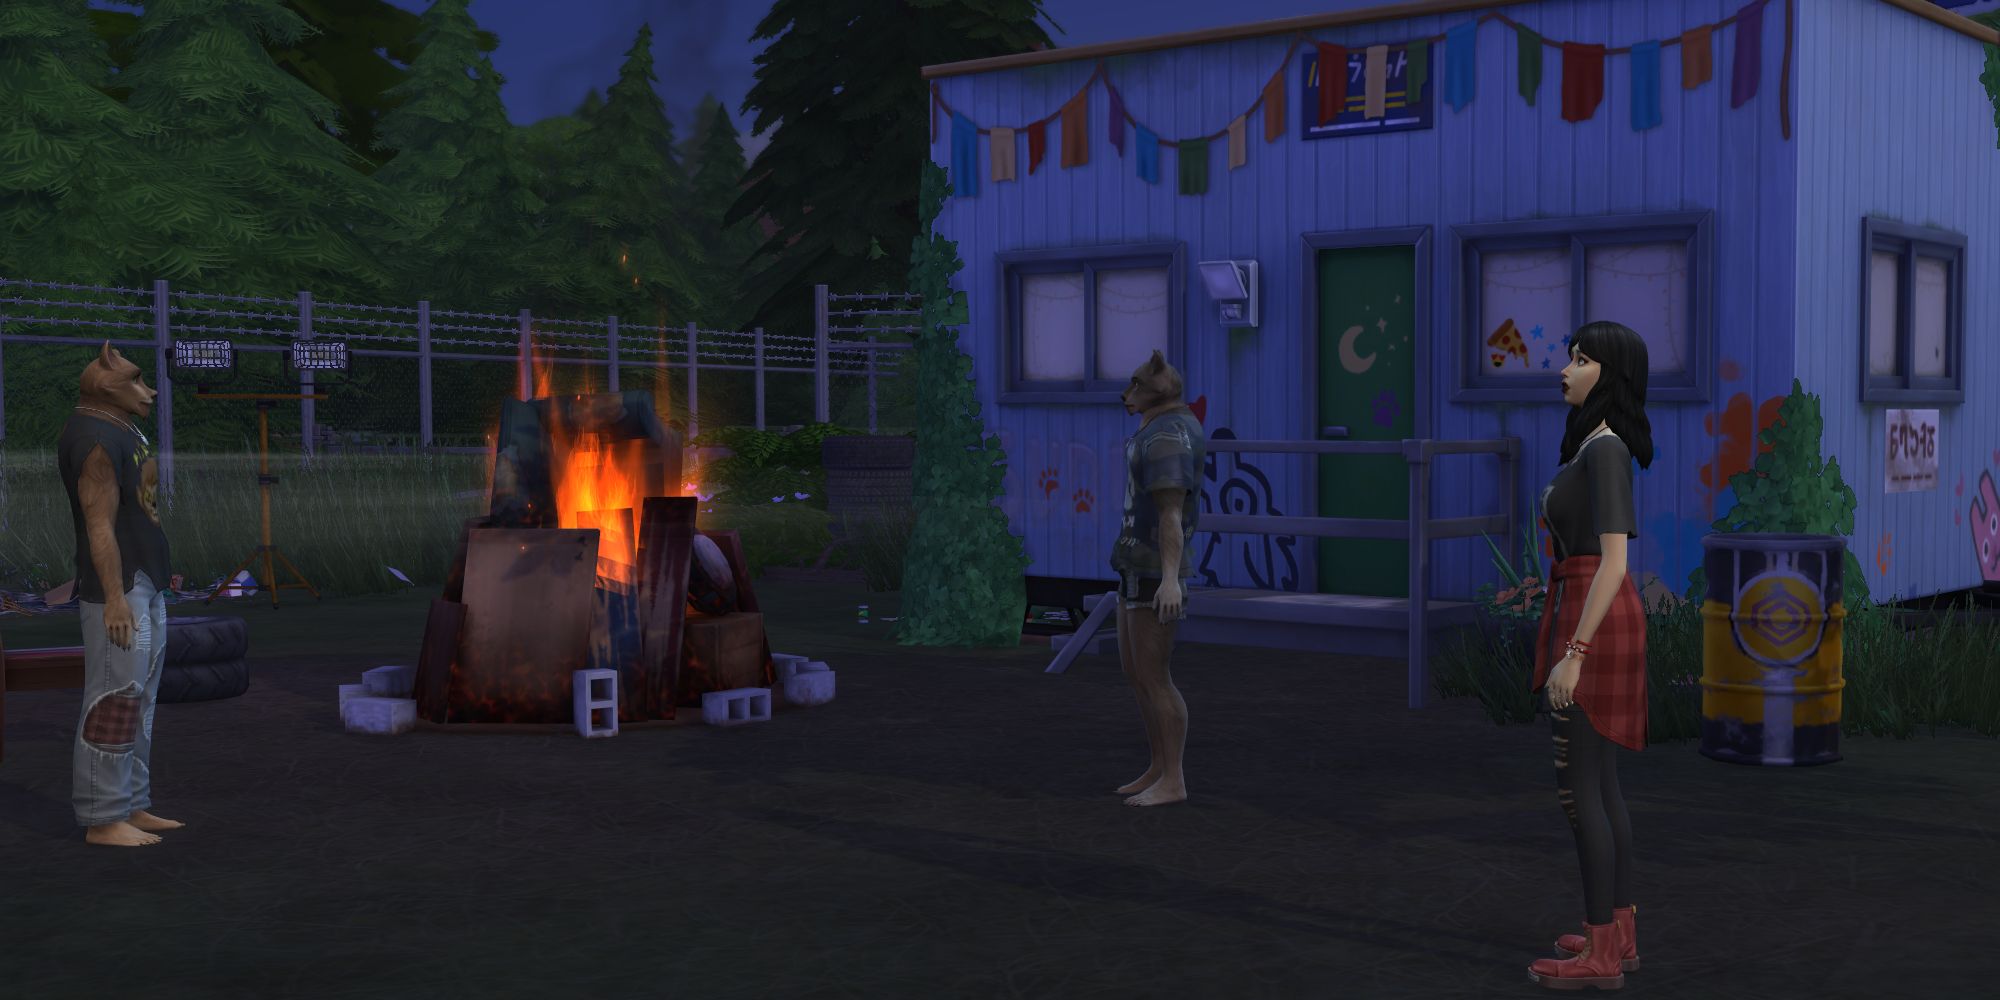 Sims 4 werewolves chilling by the bonfire